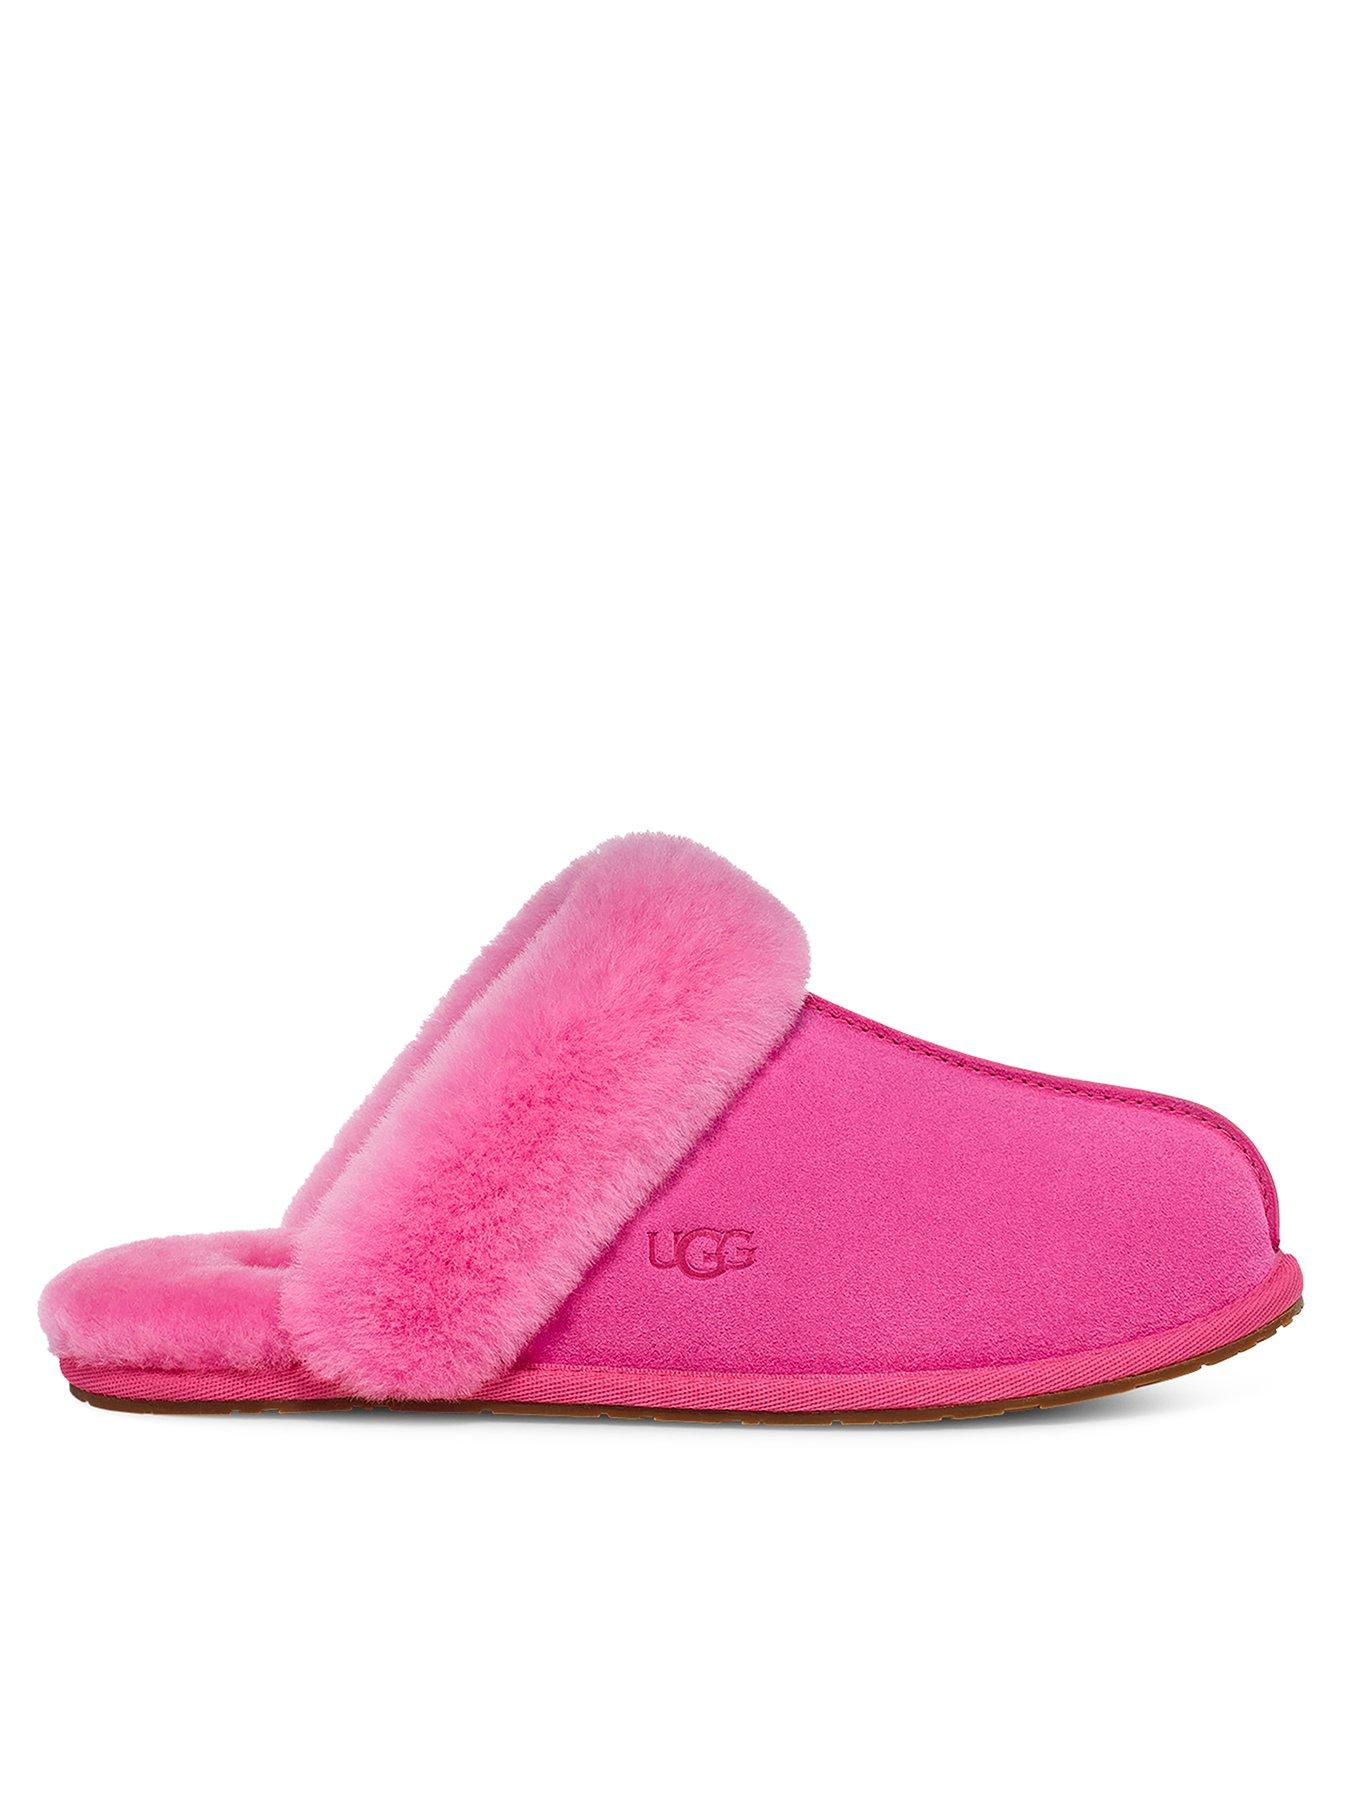 UGG Slippers Ugg Slippers | Very.co.uk